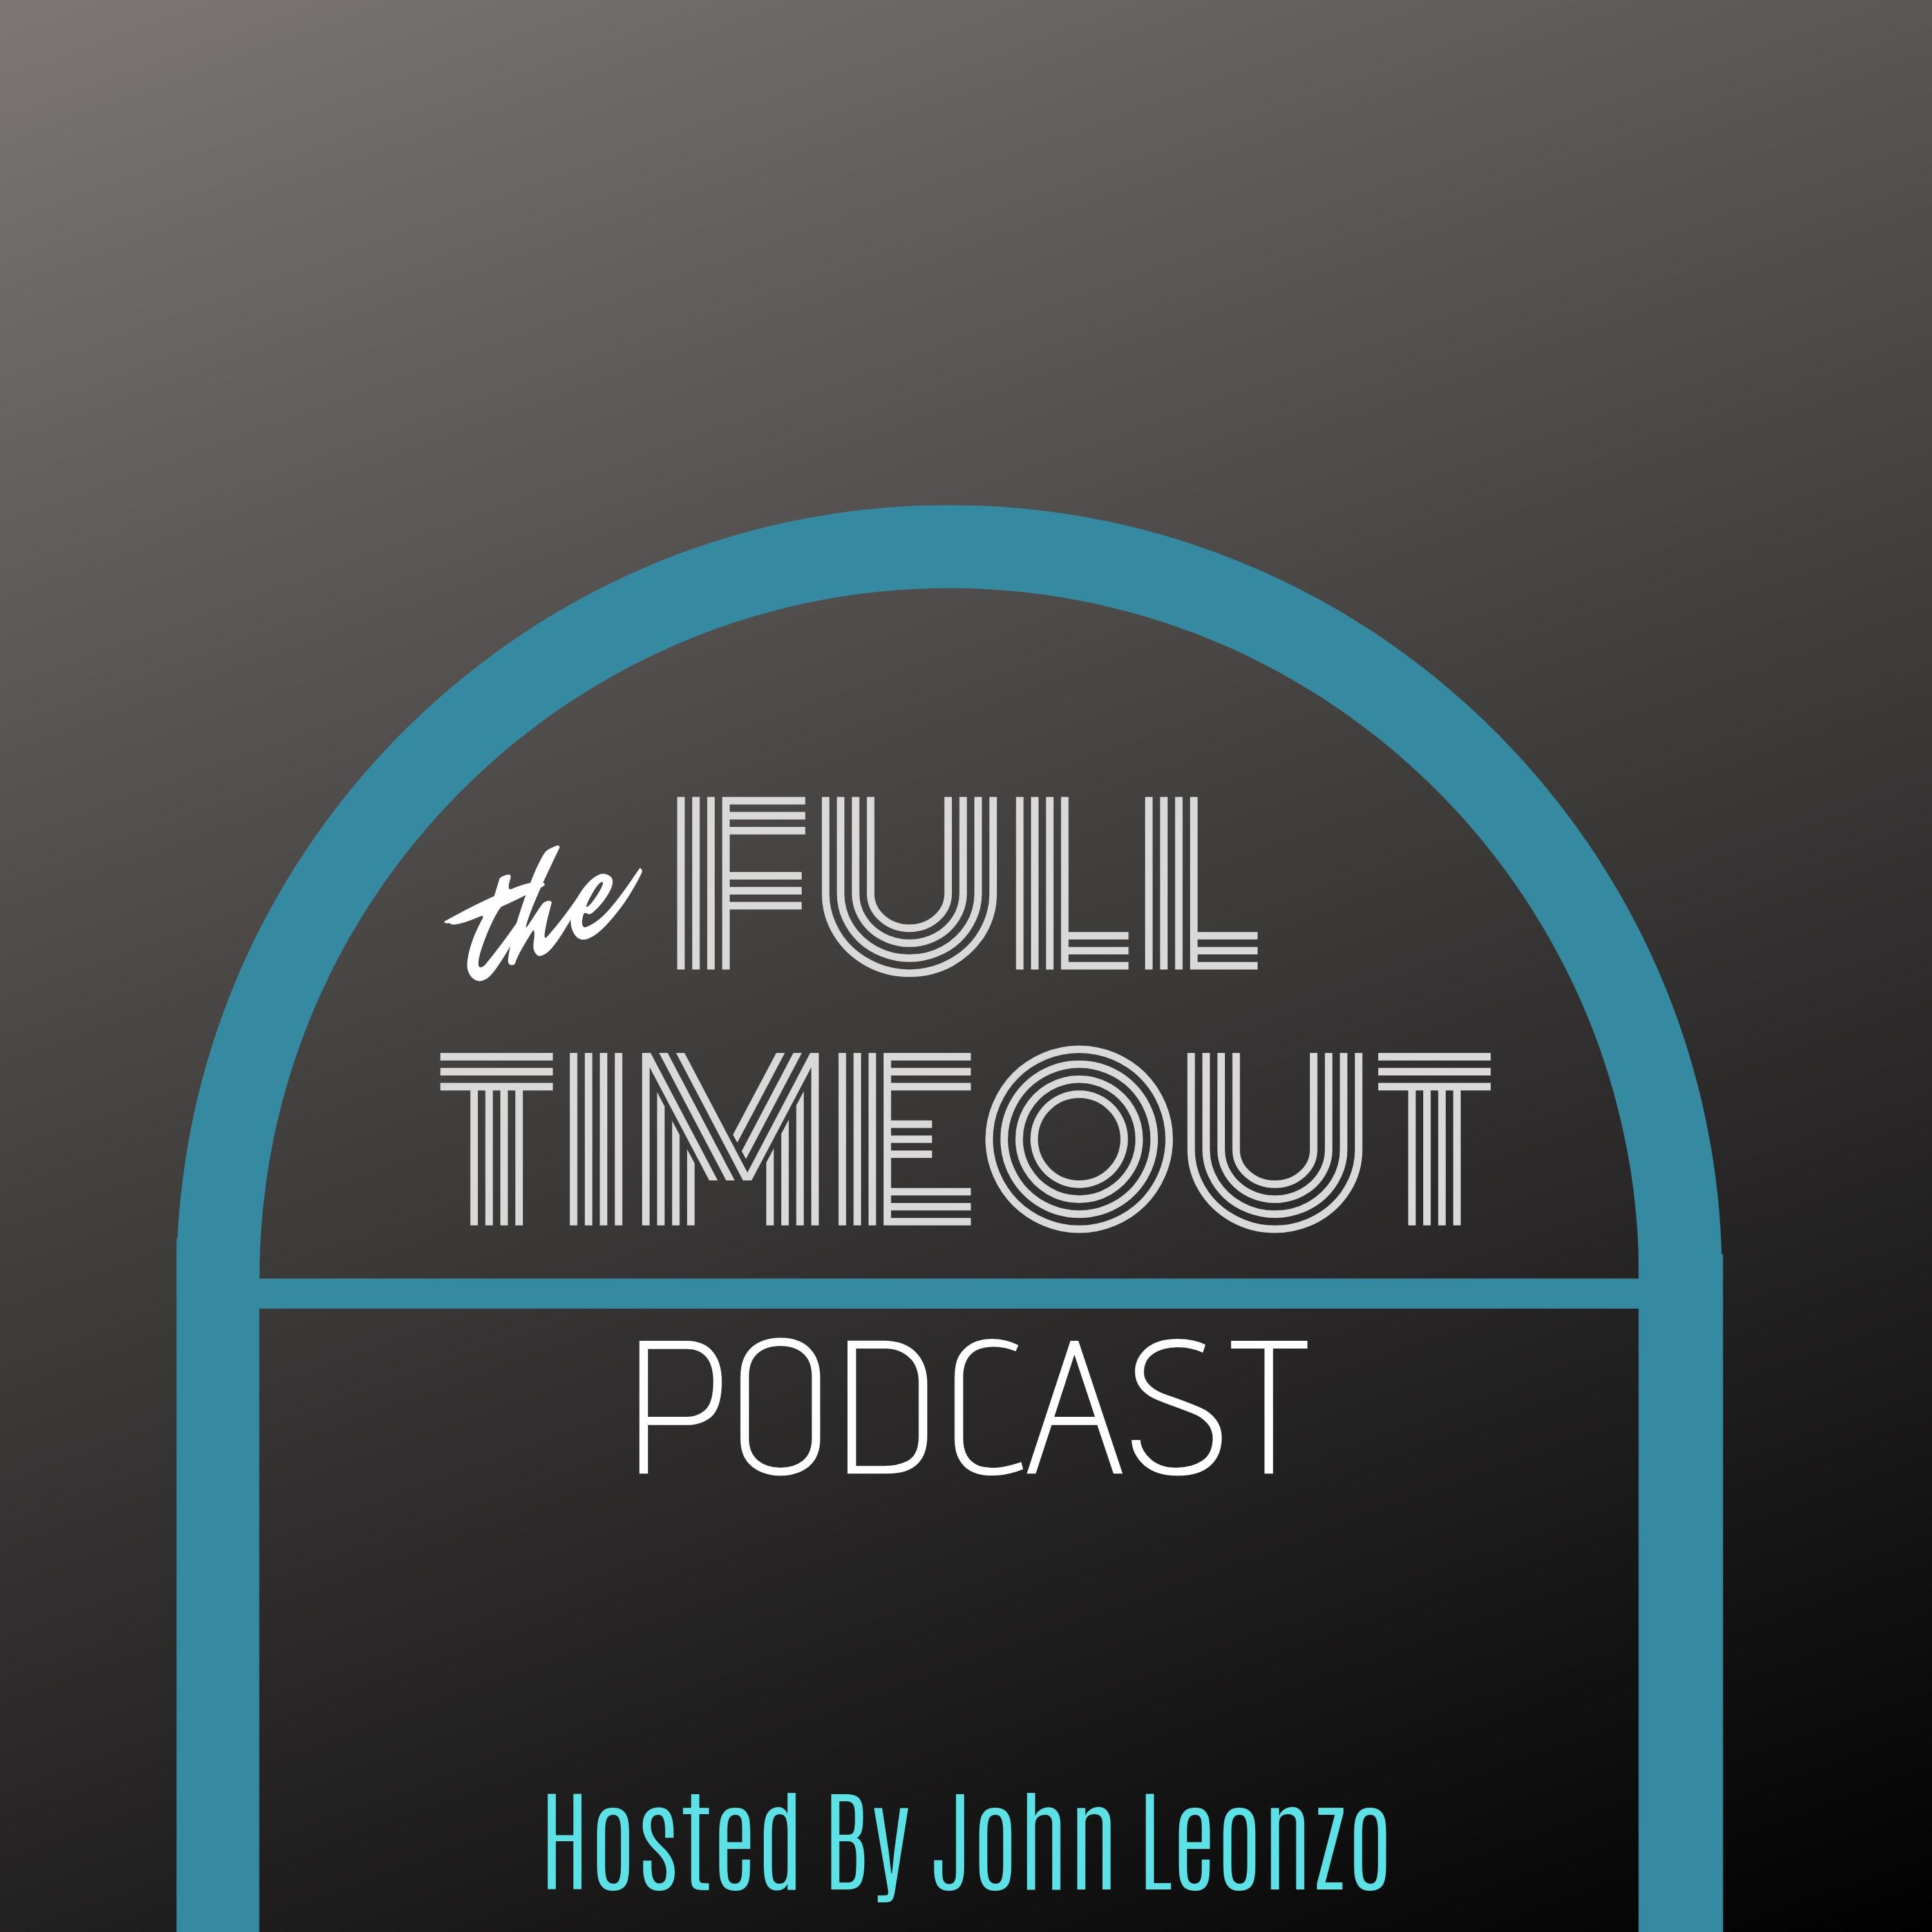 Full Timeout is a basketball coaching podcast that brings you the best ideas from basketballs brightest minds.

Hosted by @John_leonzo